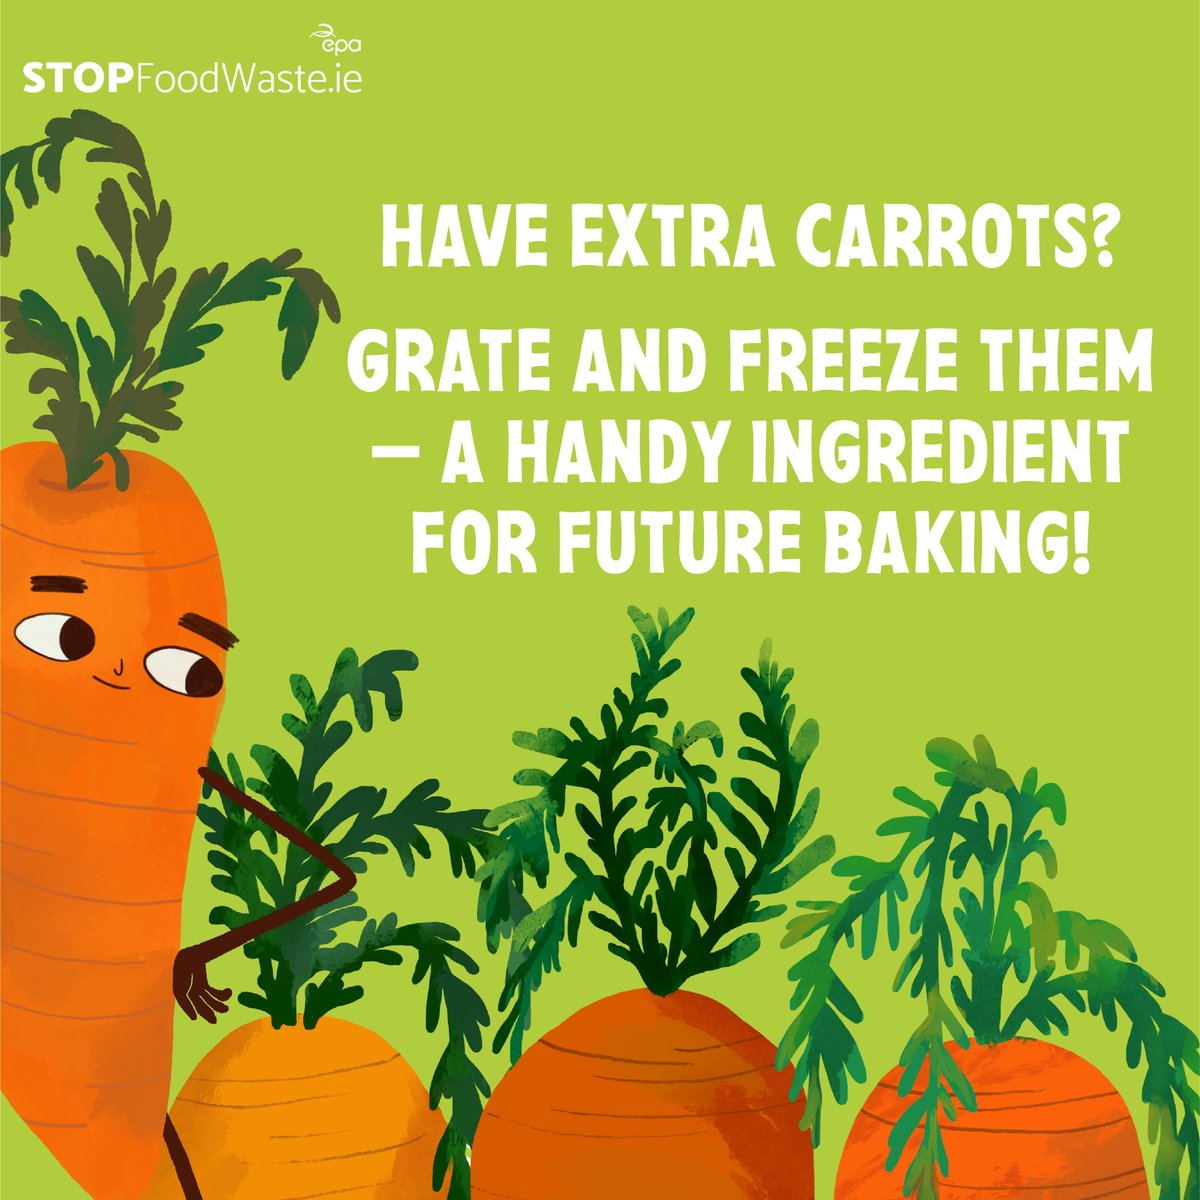 Don’t let another carrot go to waste. Grate it, freeze it and use it in carrot cakes and muffins when you next bake! Follow the link for more ways to #StopFoodWaste: stopfoodwaste.ie/shopping-and-s… #StopVeggieWaste